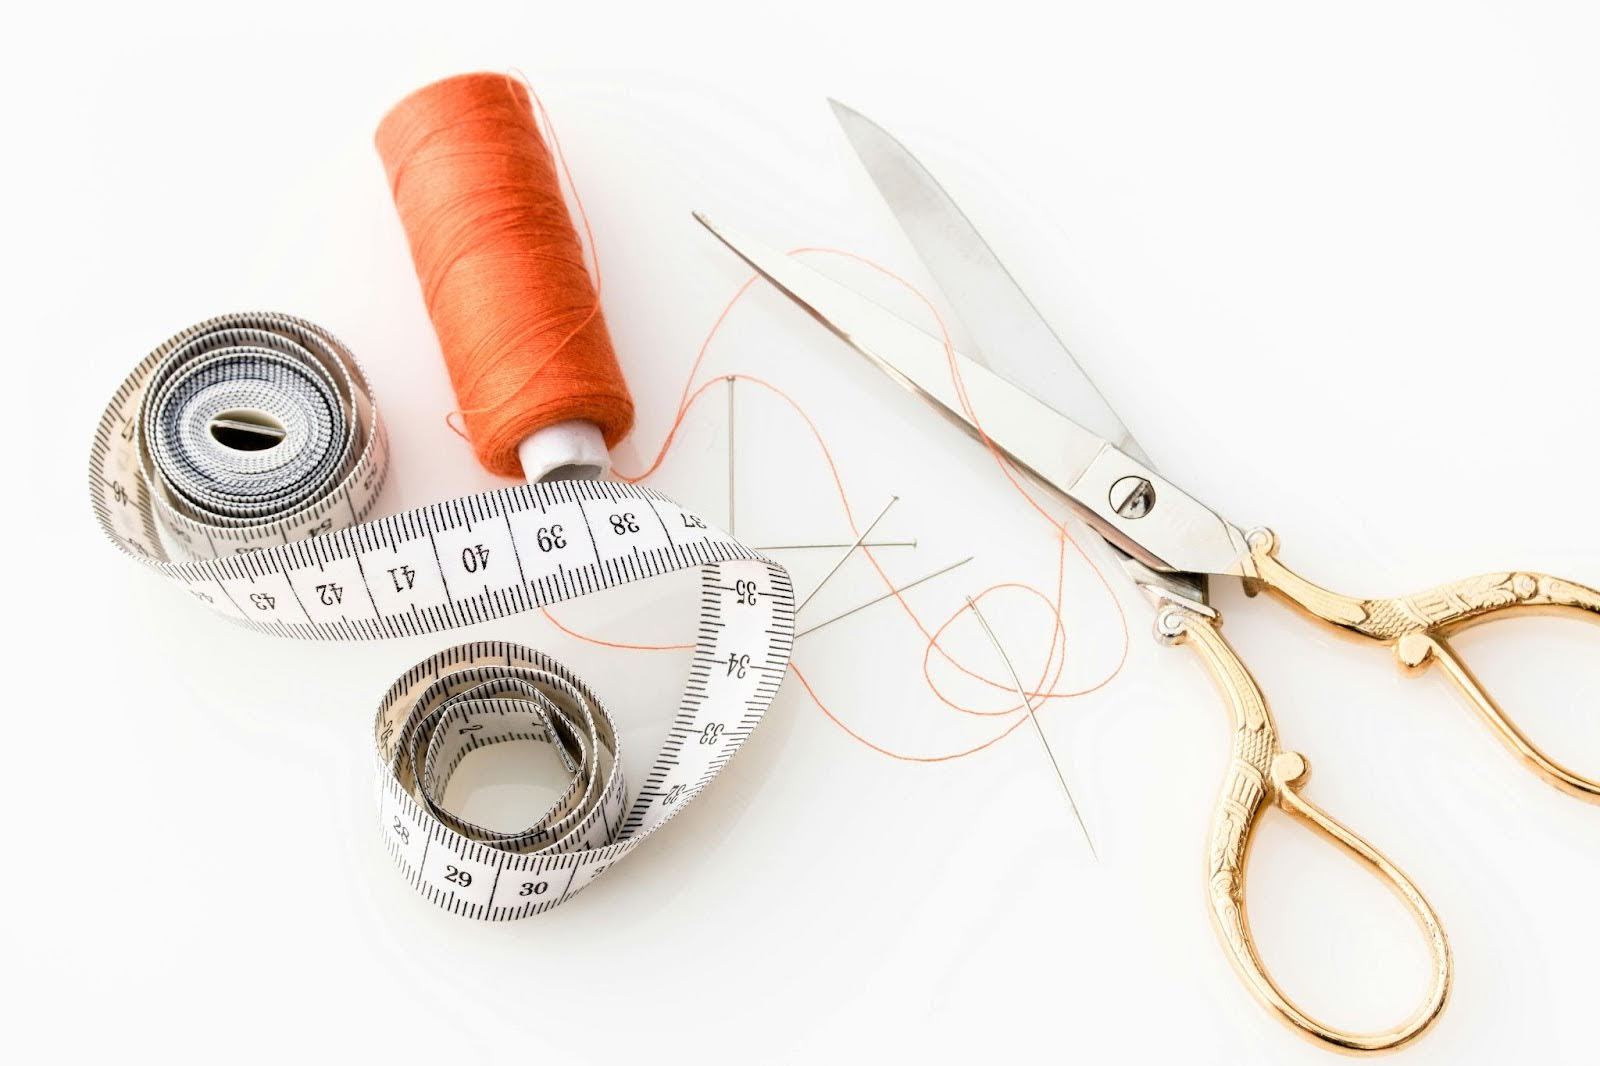 Scissors, tape measure and thread against a white background.